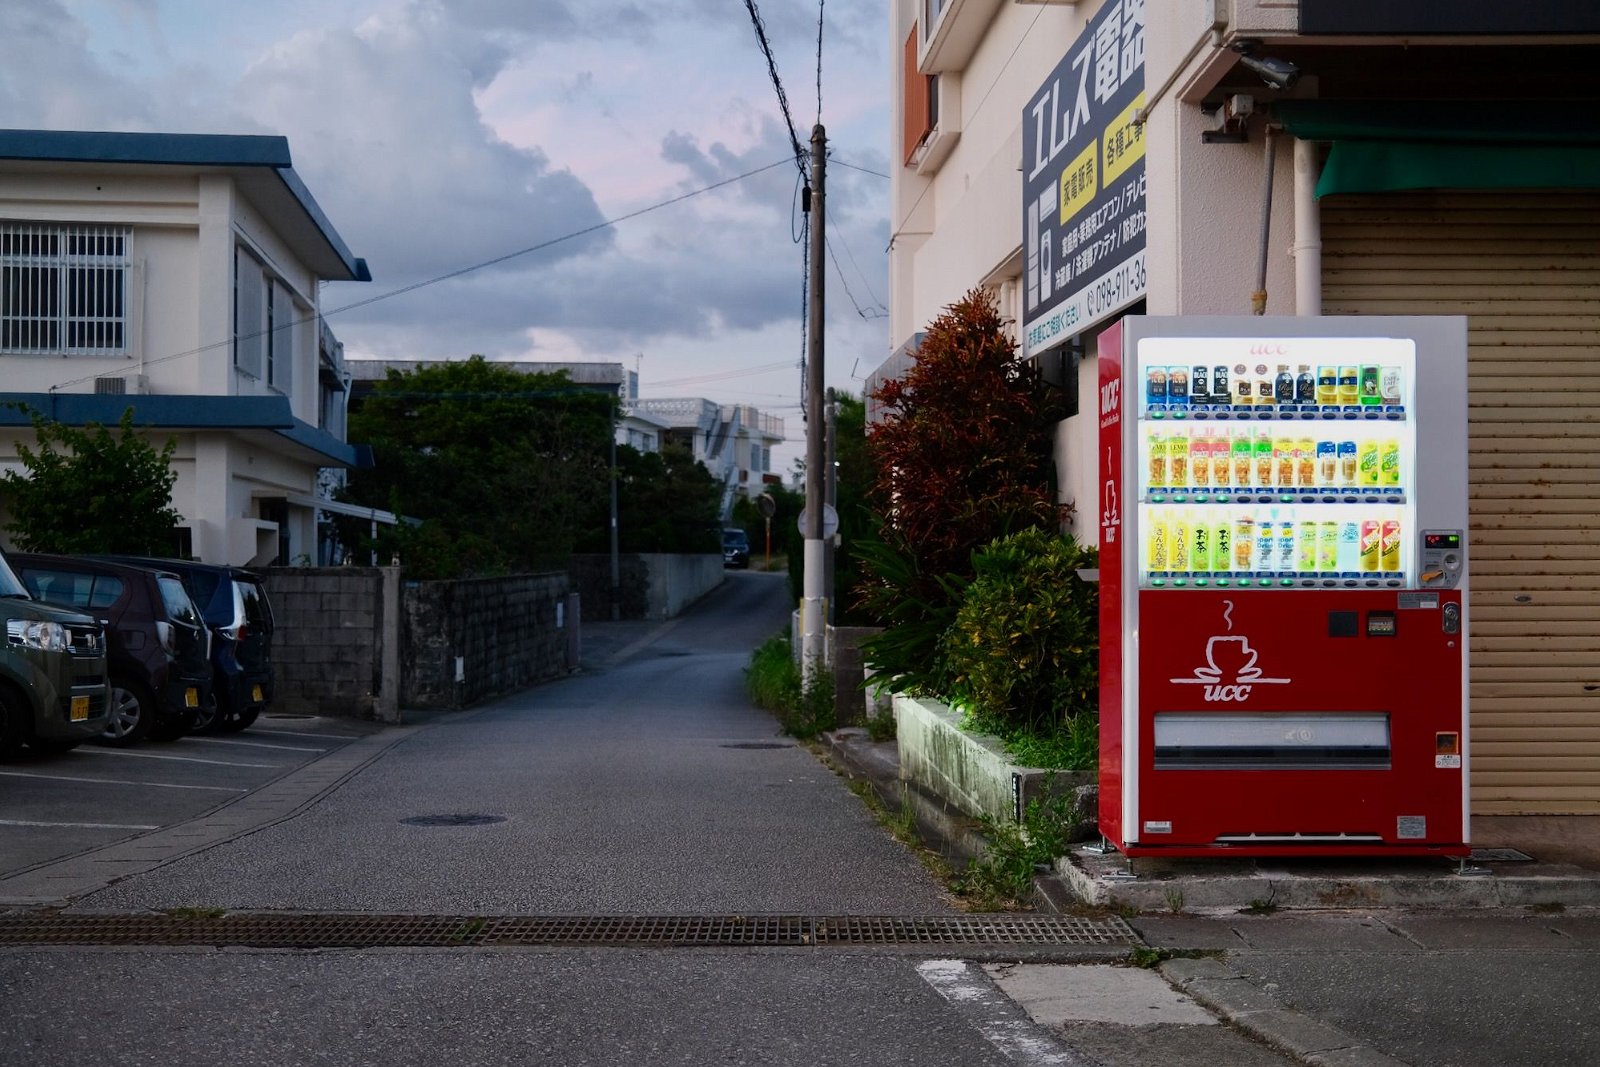 Vending machine at the entrance to a side street in Okinawa, Japan. Fuji X100v.